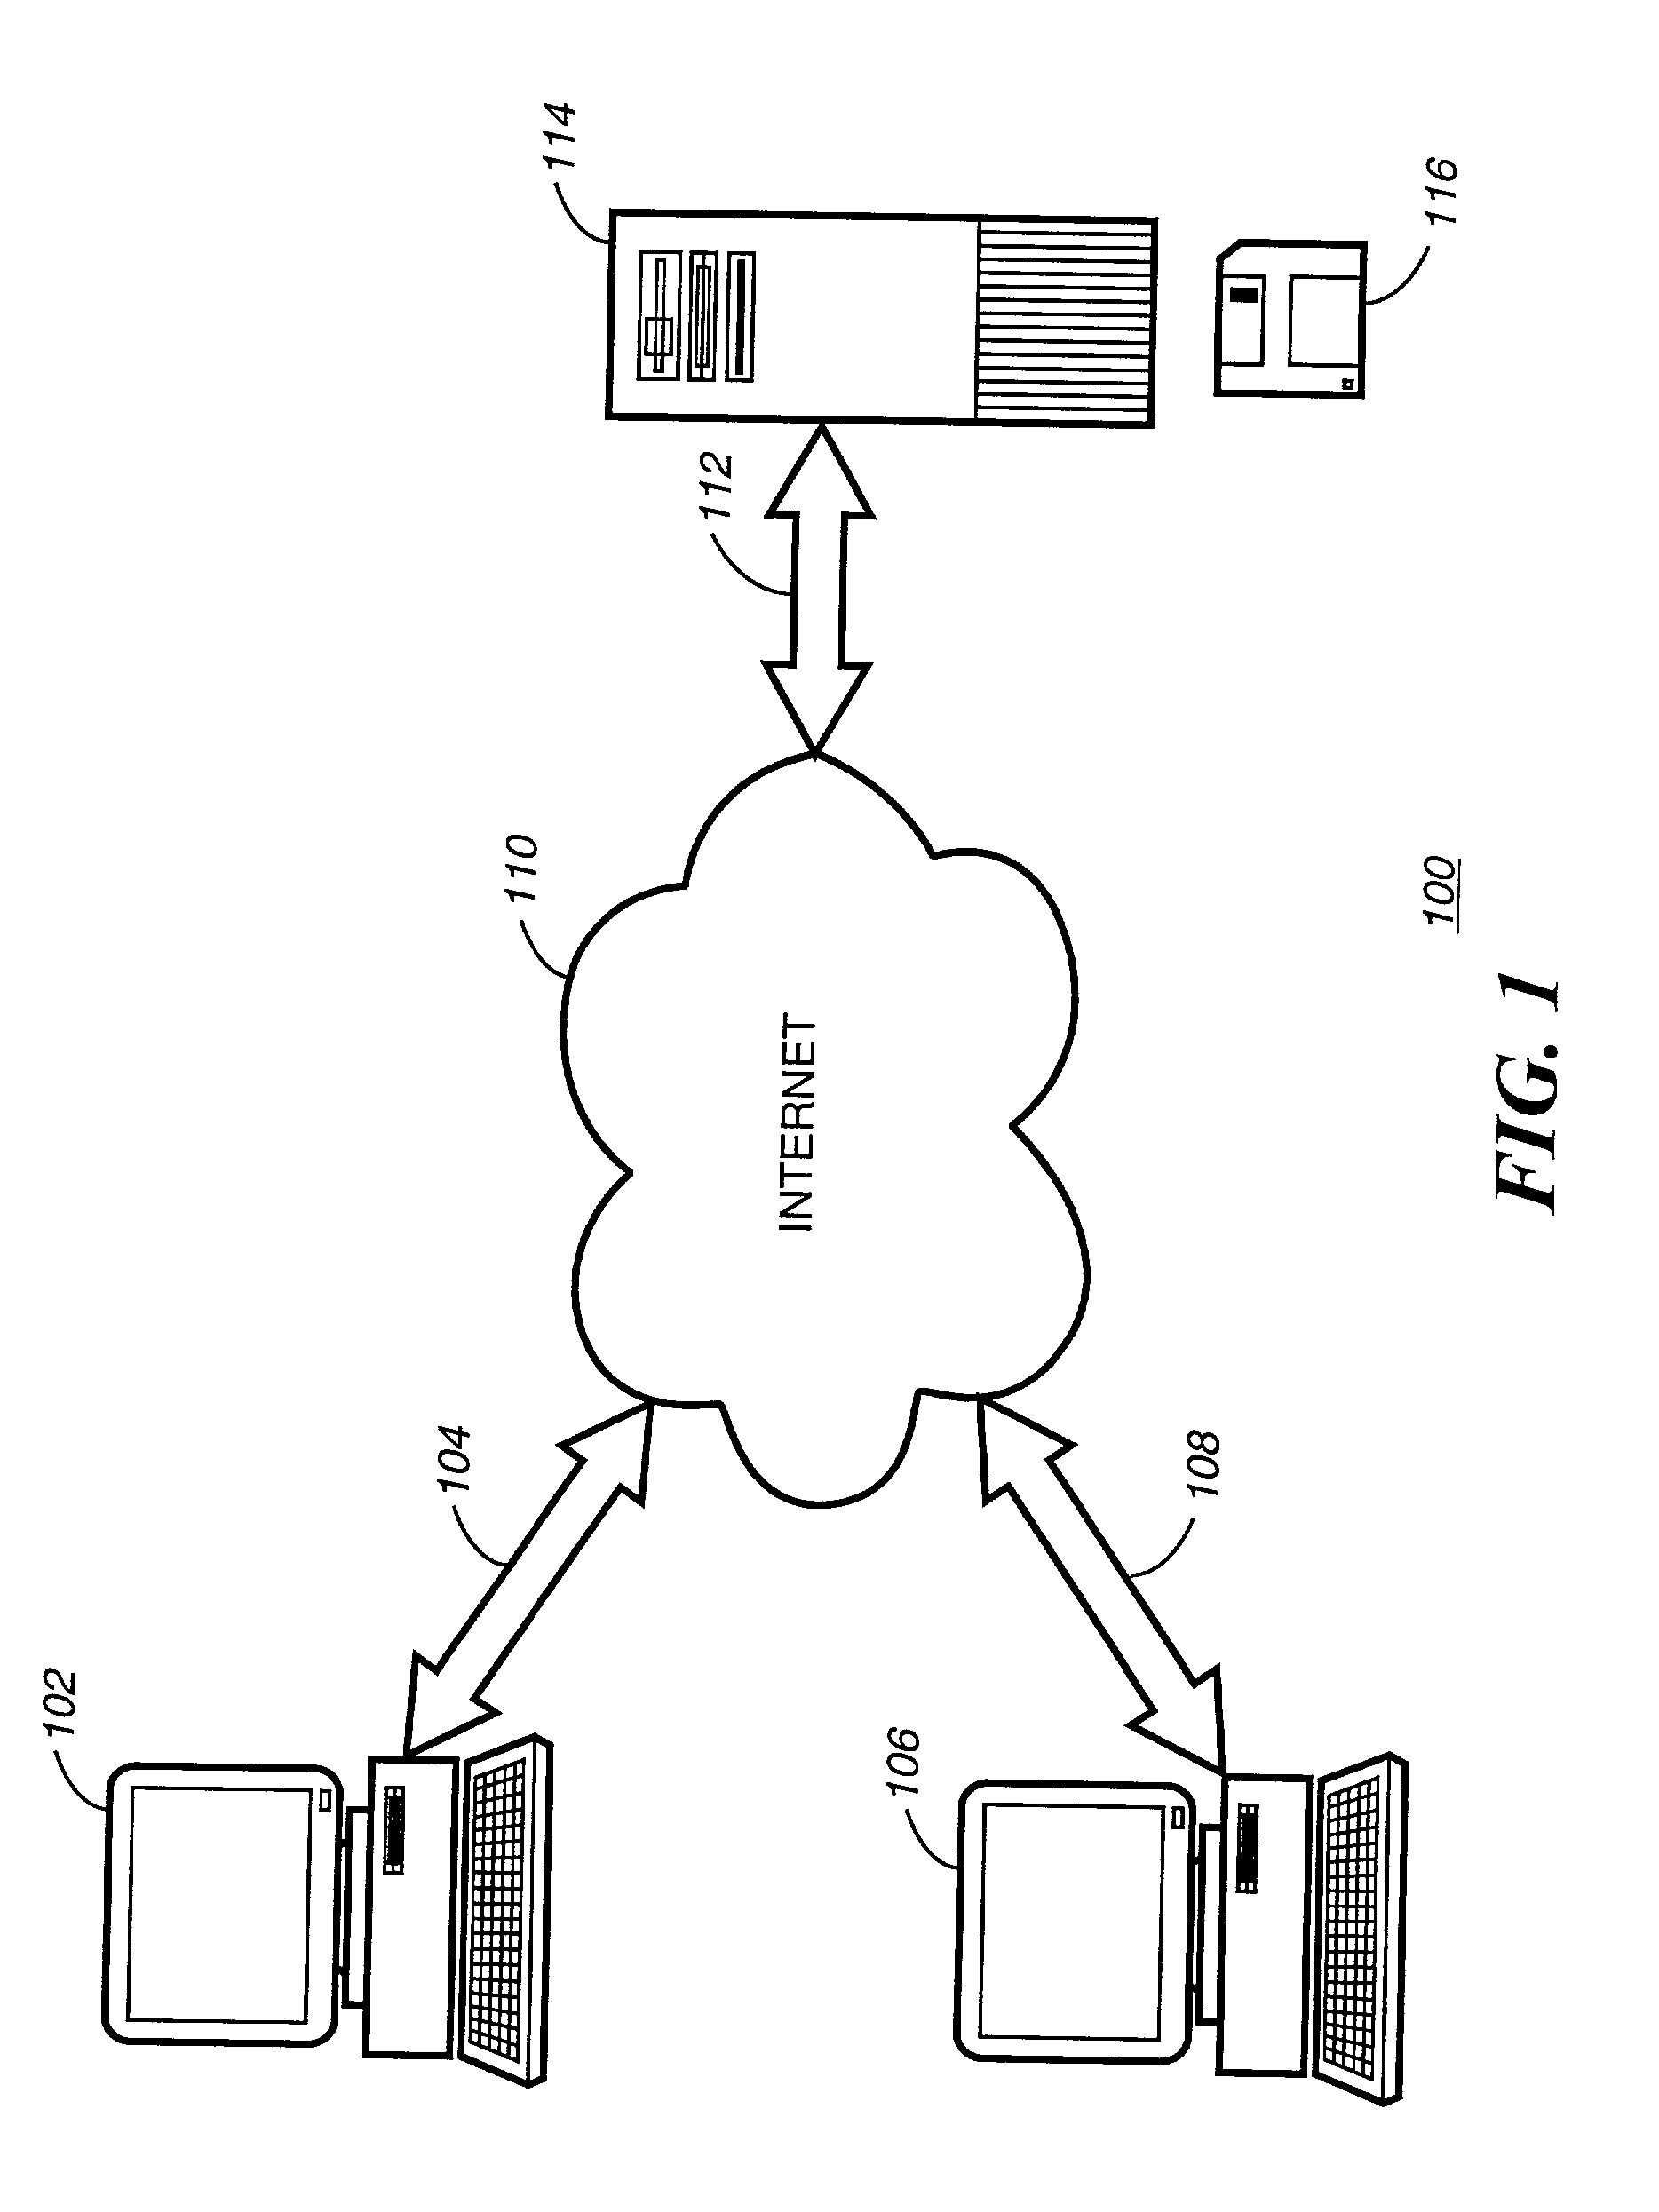 Method and apparatus to dynamically create a customized user interface based on a document type definition